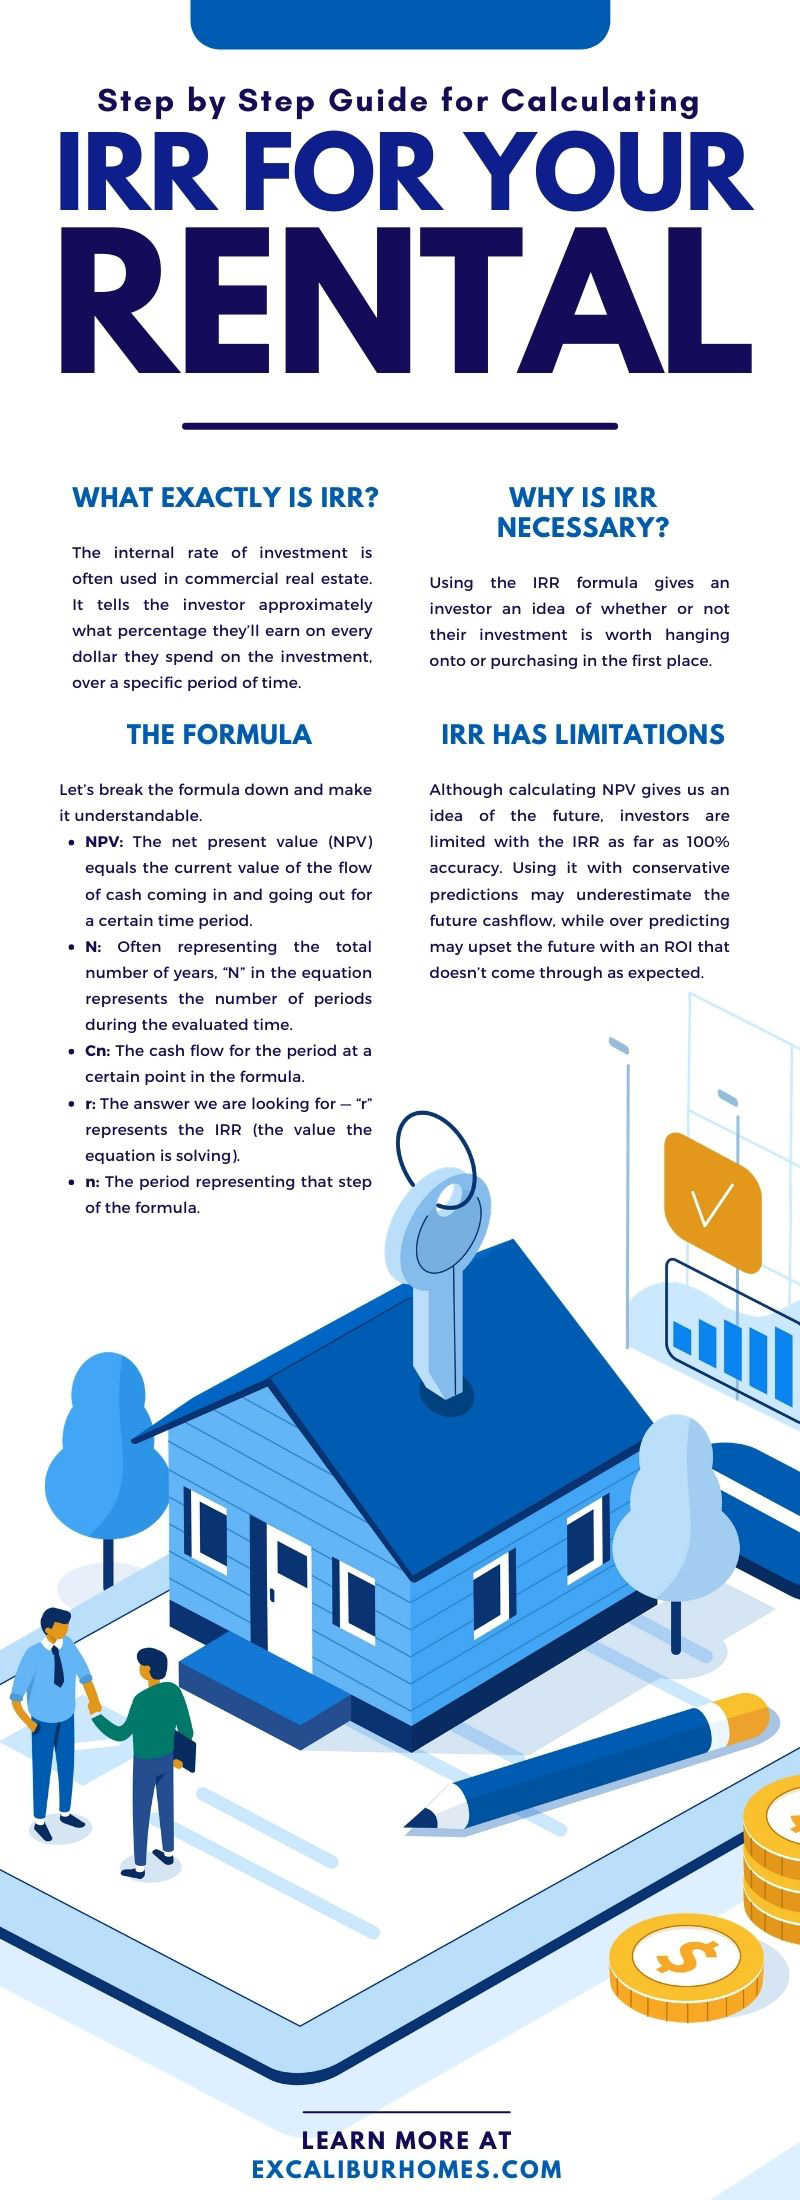 Step by Step Guide for Calculating IRR for Your Rental